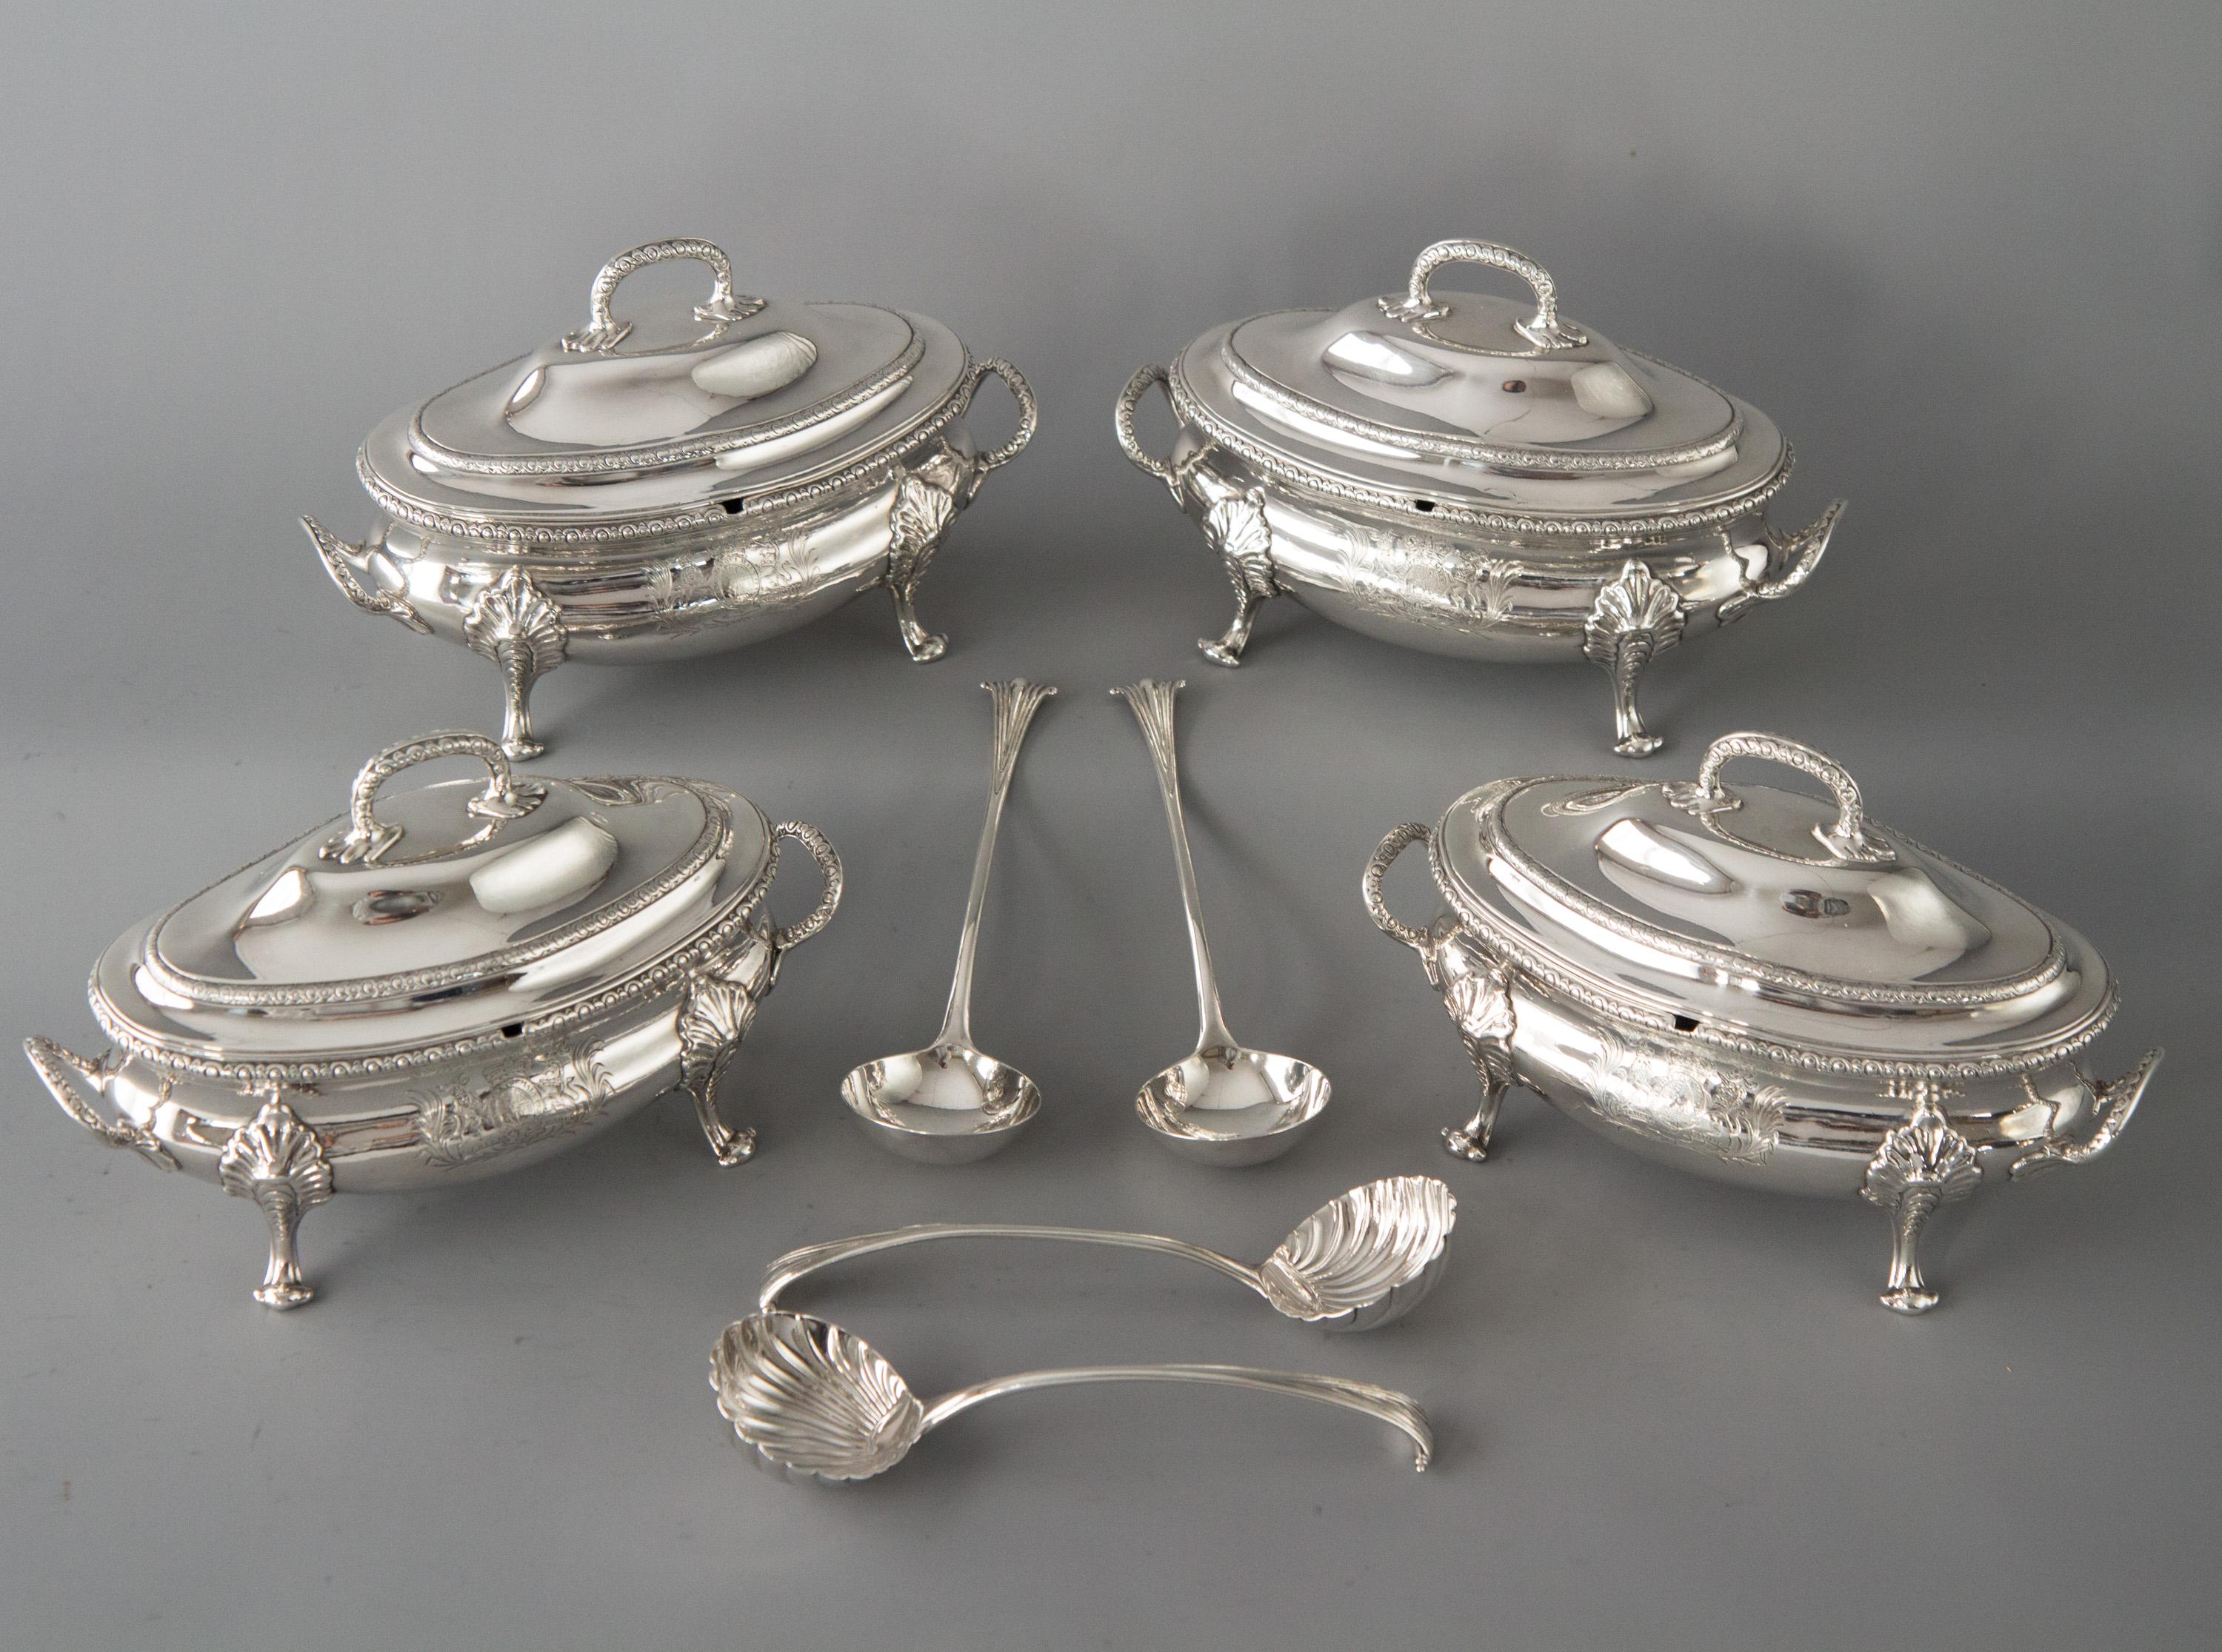 An exquisite set of four George III silver oval two handled oval sauce tureens and covers. Of Oval bombe form on four rocaille capped scroll feet, with ovolo cast borders and handles.

Engraved to one side with Queen Anne's Royal coat of arms and